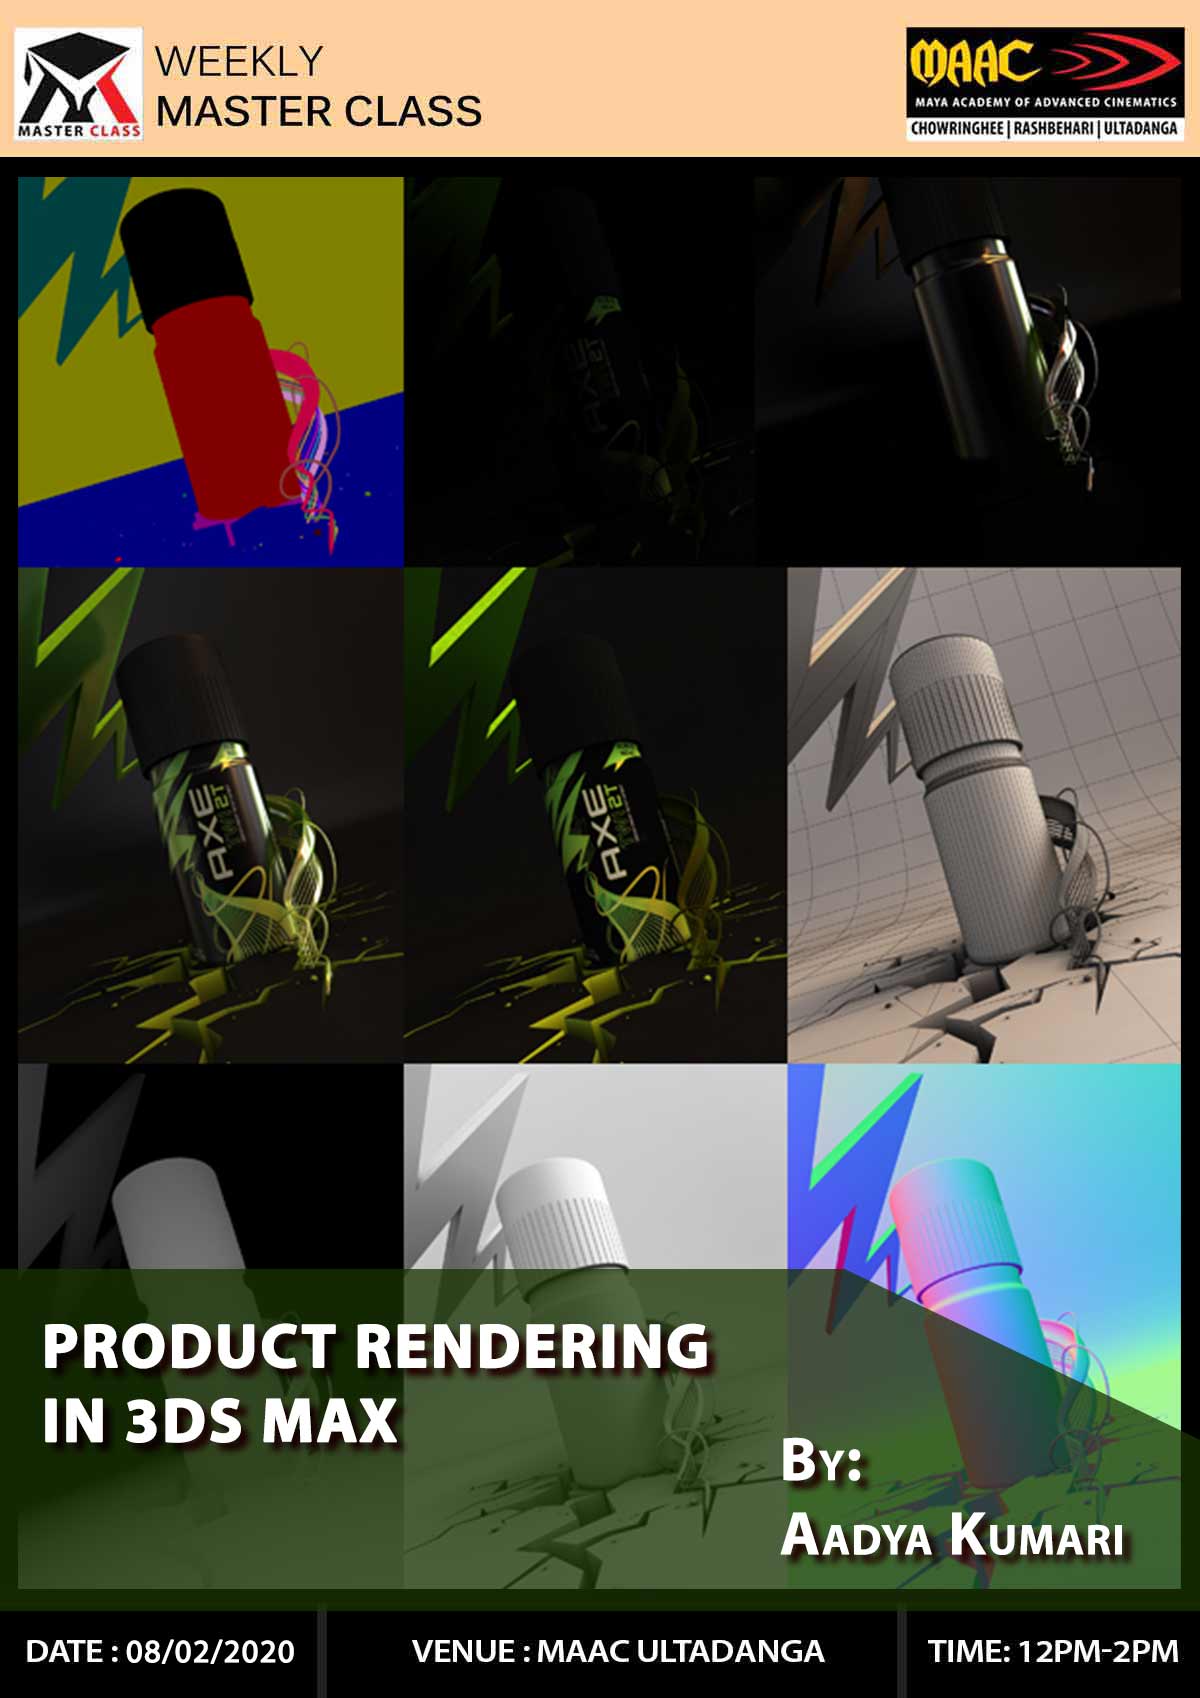 Weekly Master Class on Product Rendering In 3Ds Max